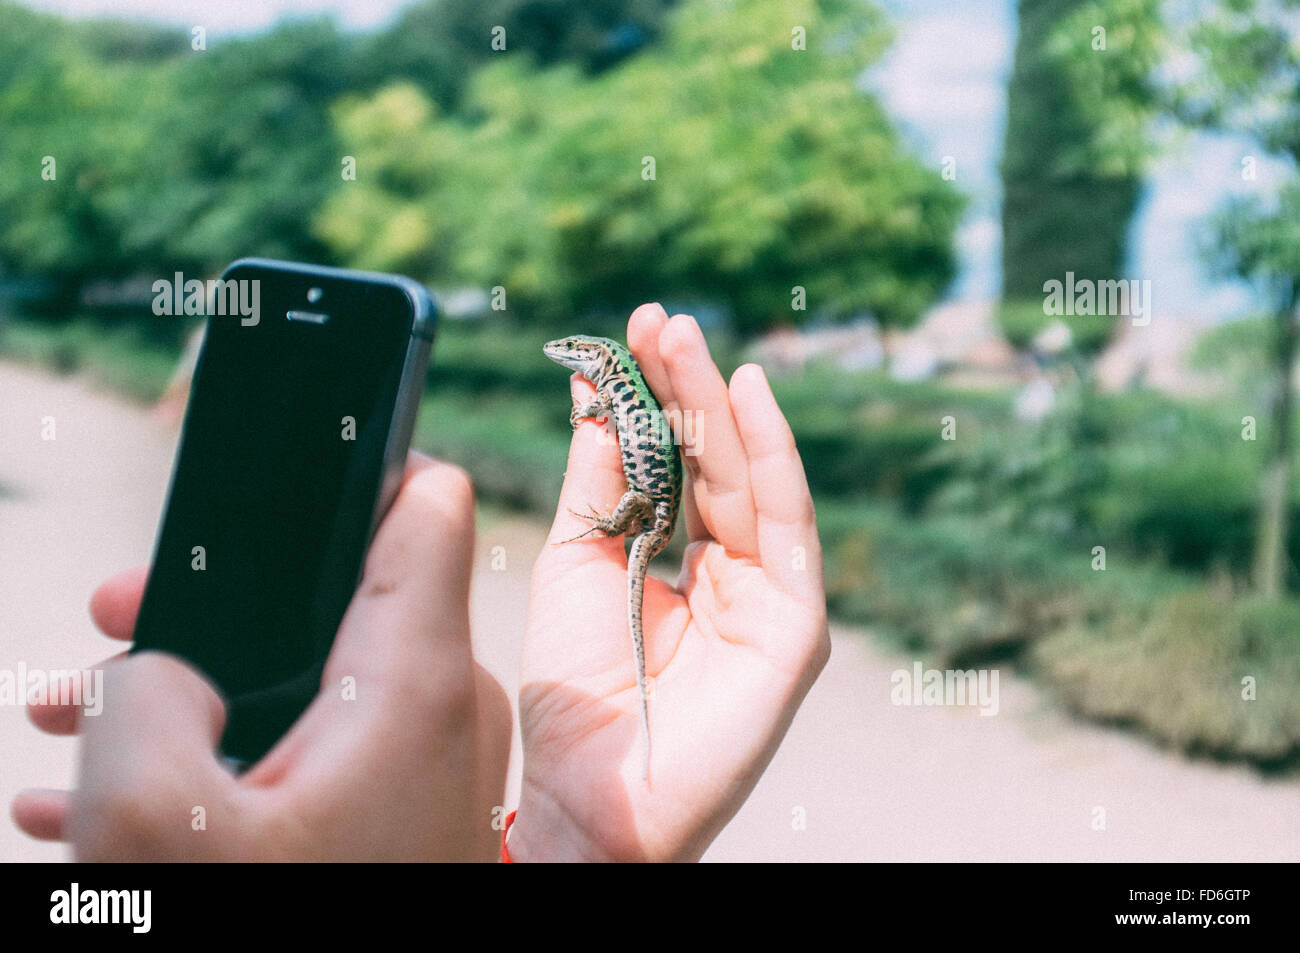 Person Taking Picture Of Lizard Stock Photo